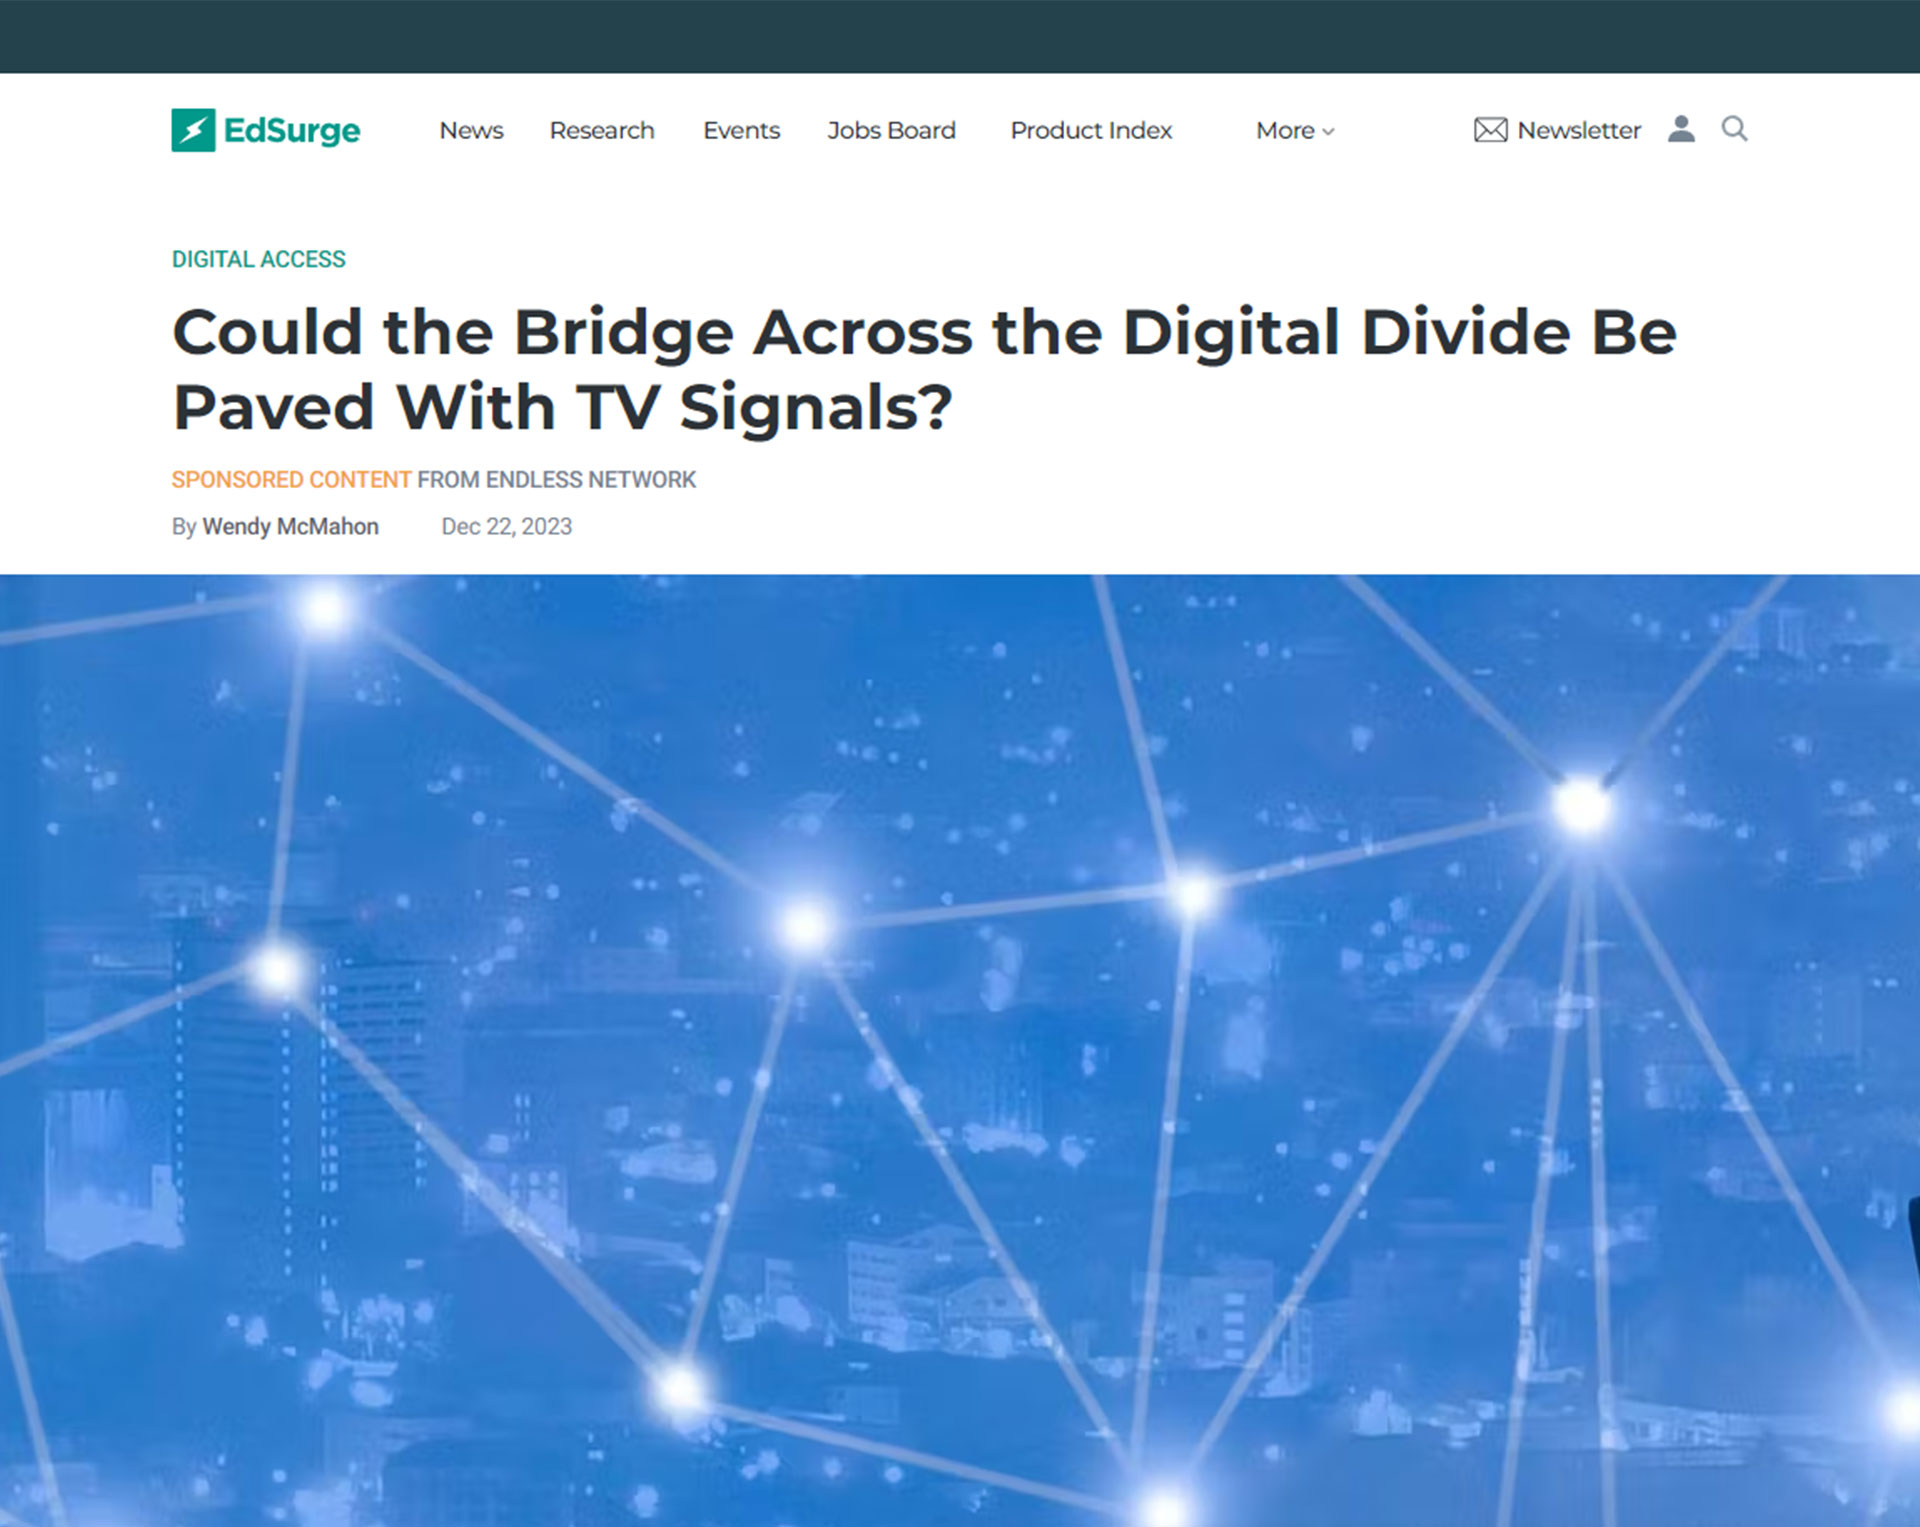 Could the Bridge Across the Digital Divide Be Paved With TV Signals?